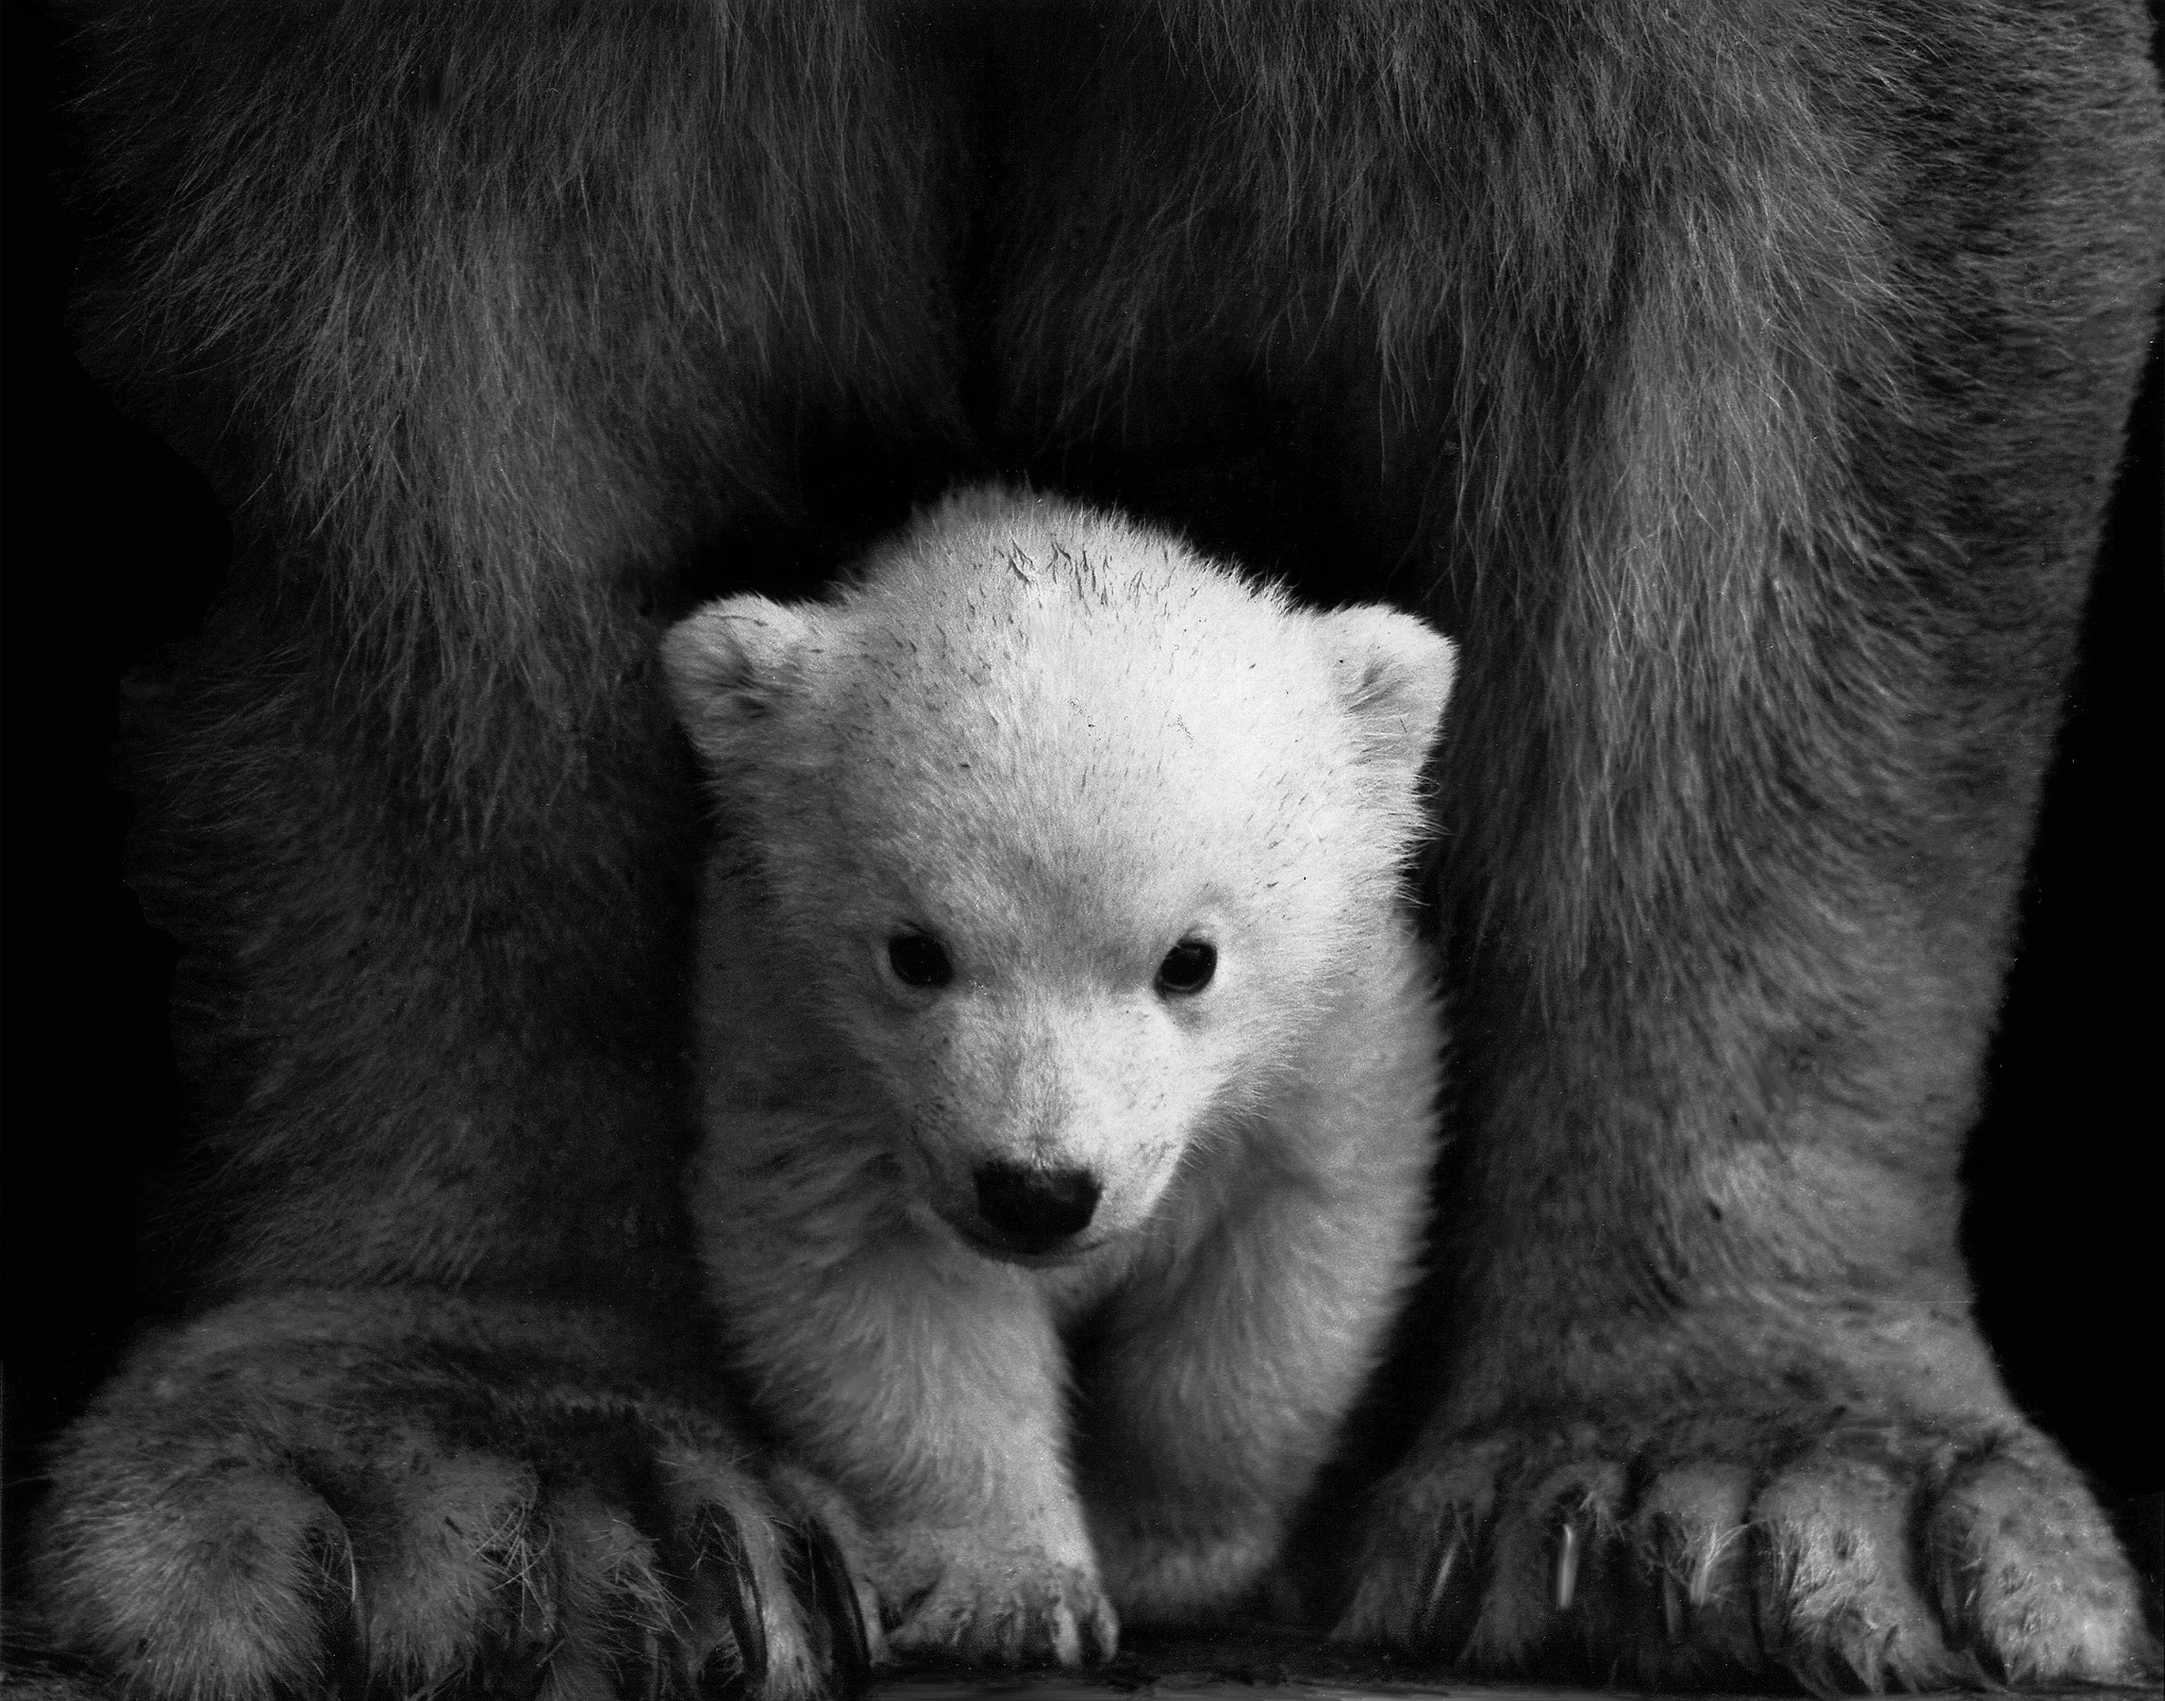 a black and white photo of a baby polar bear, by Hans Hinterreiter, sheltered, contrasting, 240p, colorless